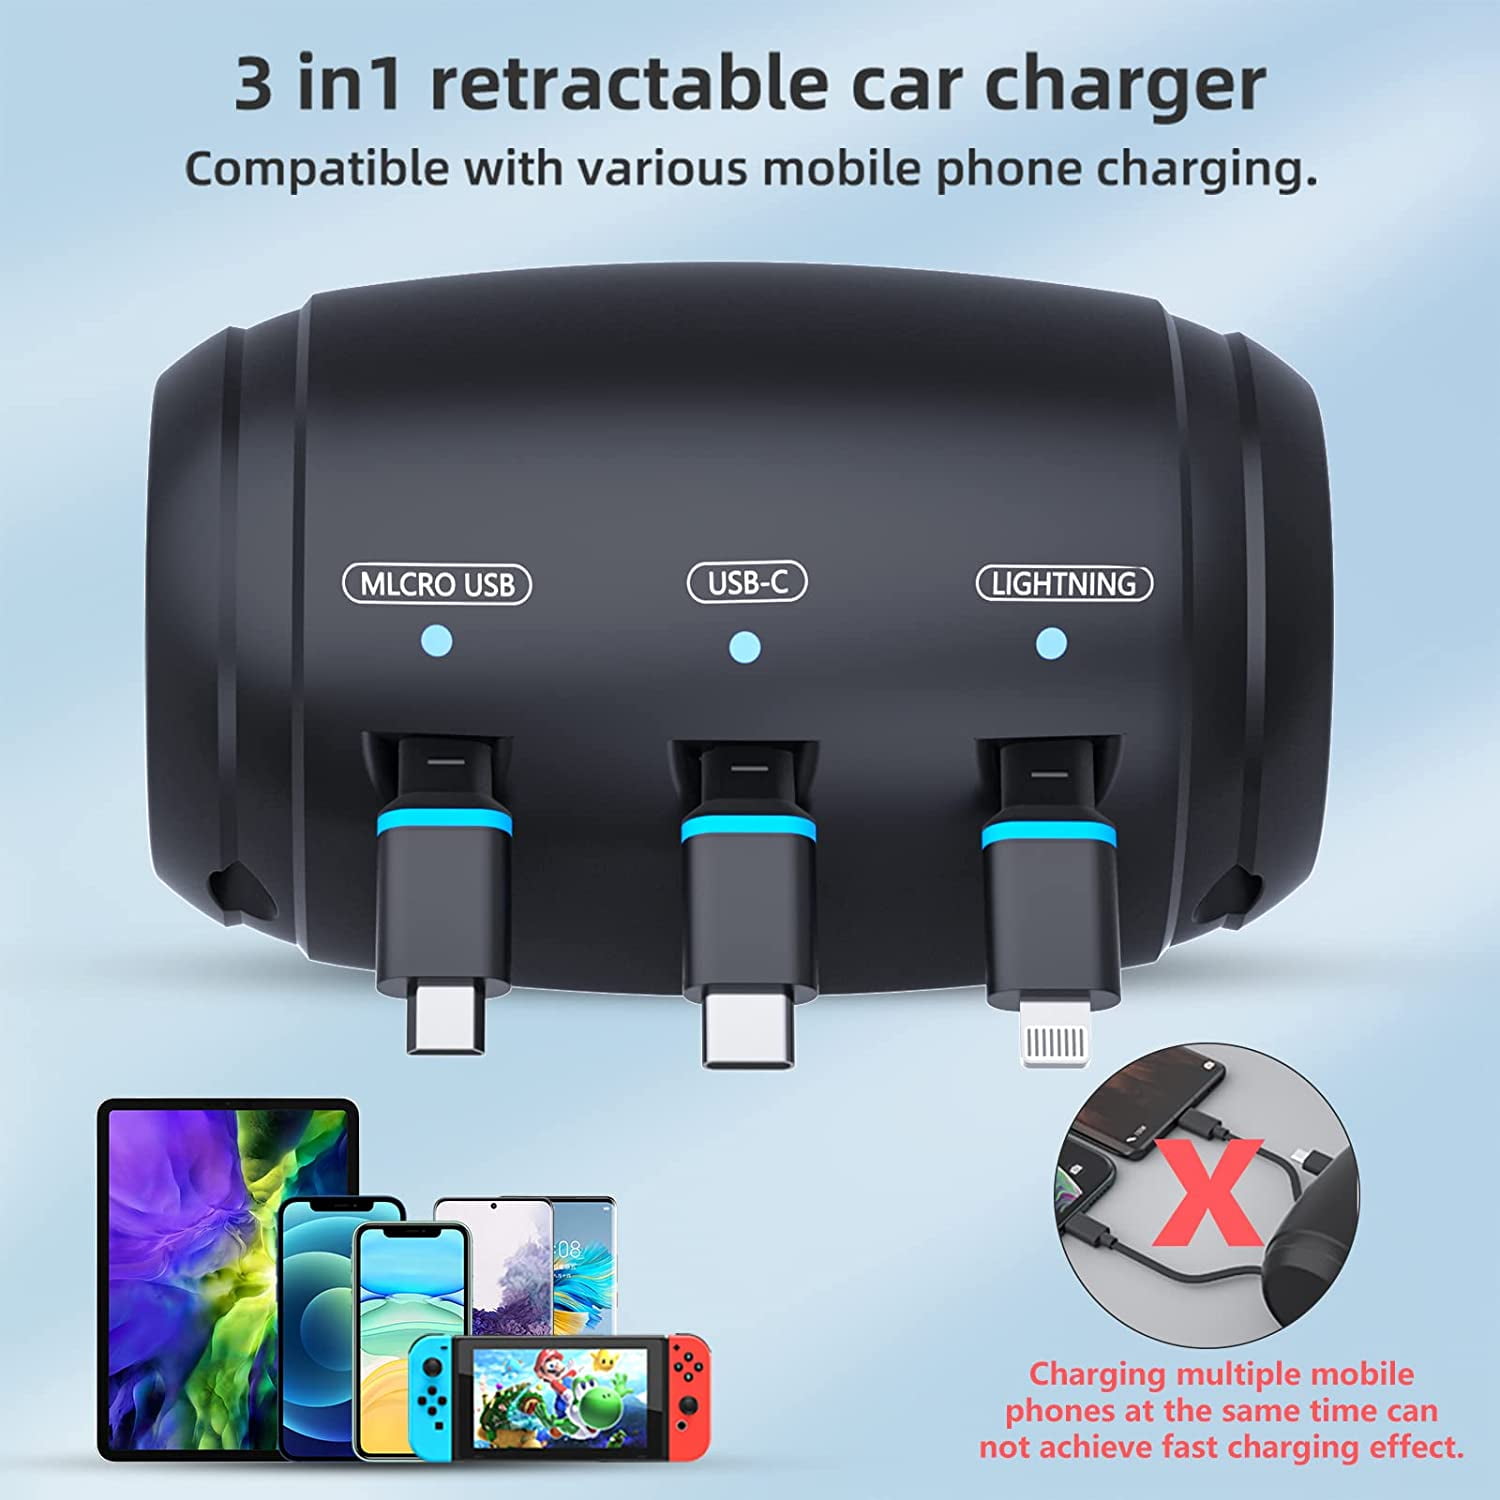 Petmoko Universal Retractable Charging Station Box 3 in 1 Car Back Seat  Fast Power Charging Cable USB Type C Compatible with iPhone/iPad/Android 